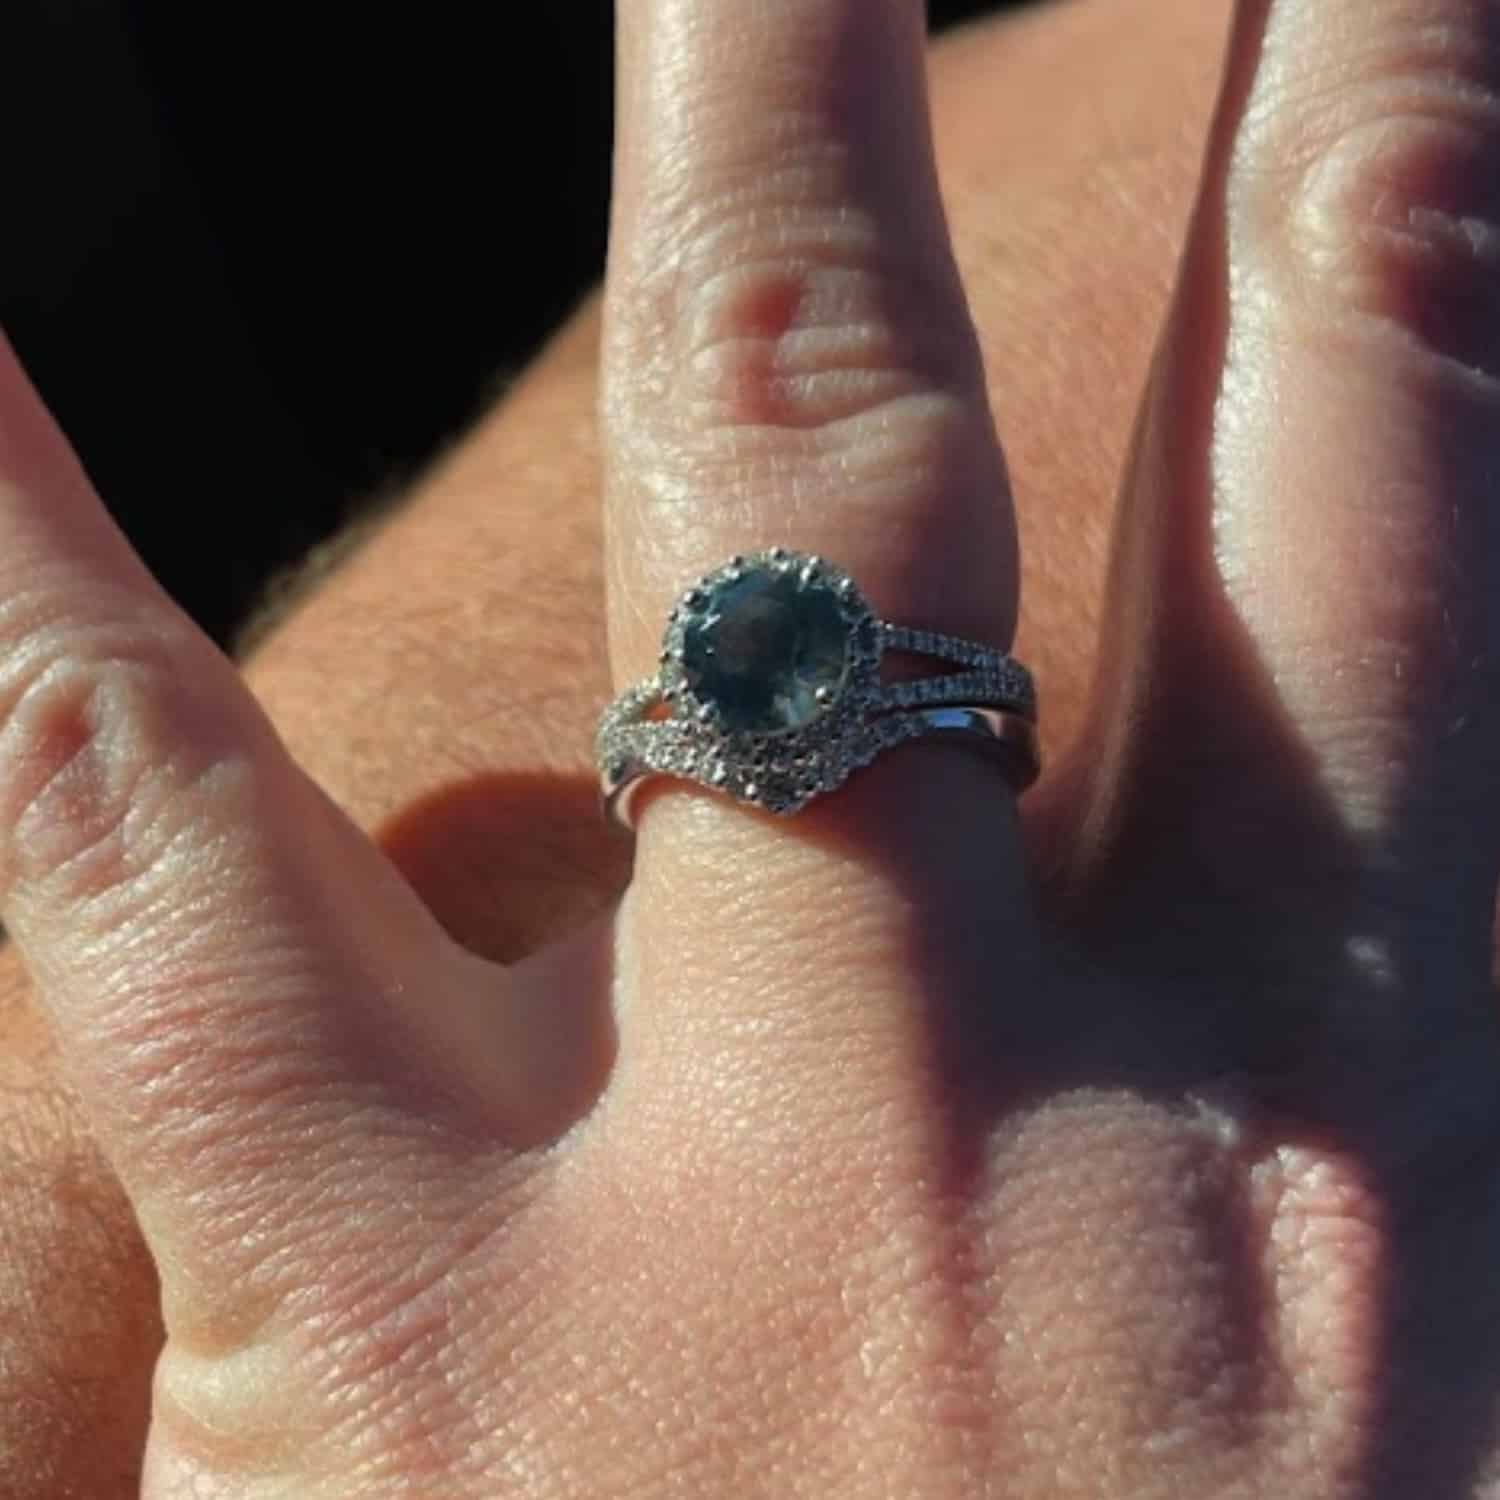 A photo from a customer review featuring a white gold "Charlotte" ring and "Rhine" band